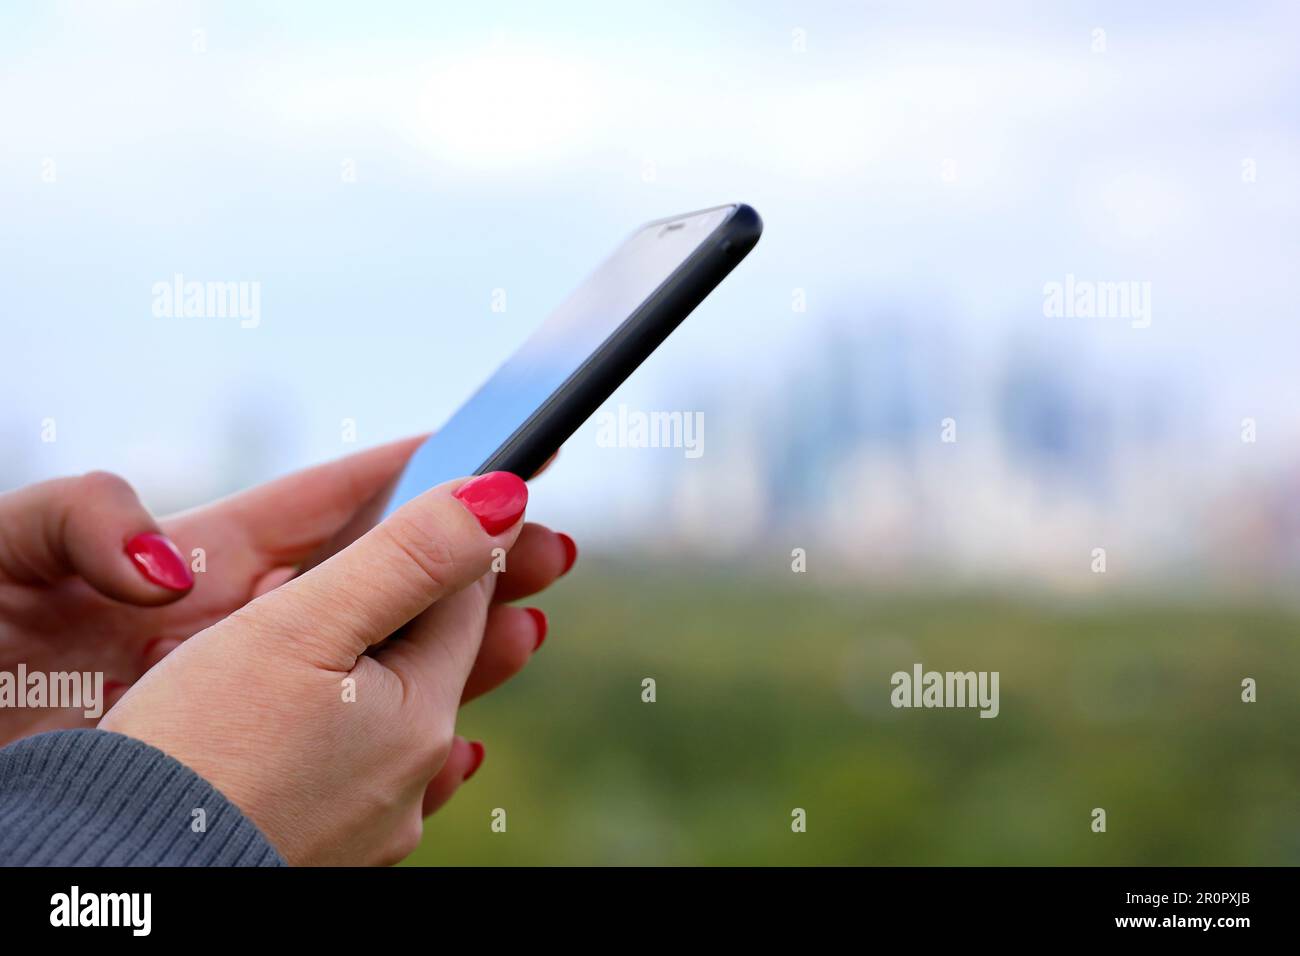 Female hands with smartphone close up on blurred city skyscrapers background. Woman with red manicure using mobile phone in park Stock Photo